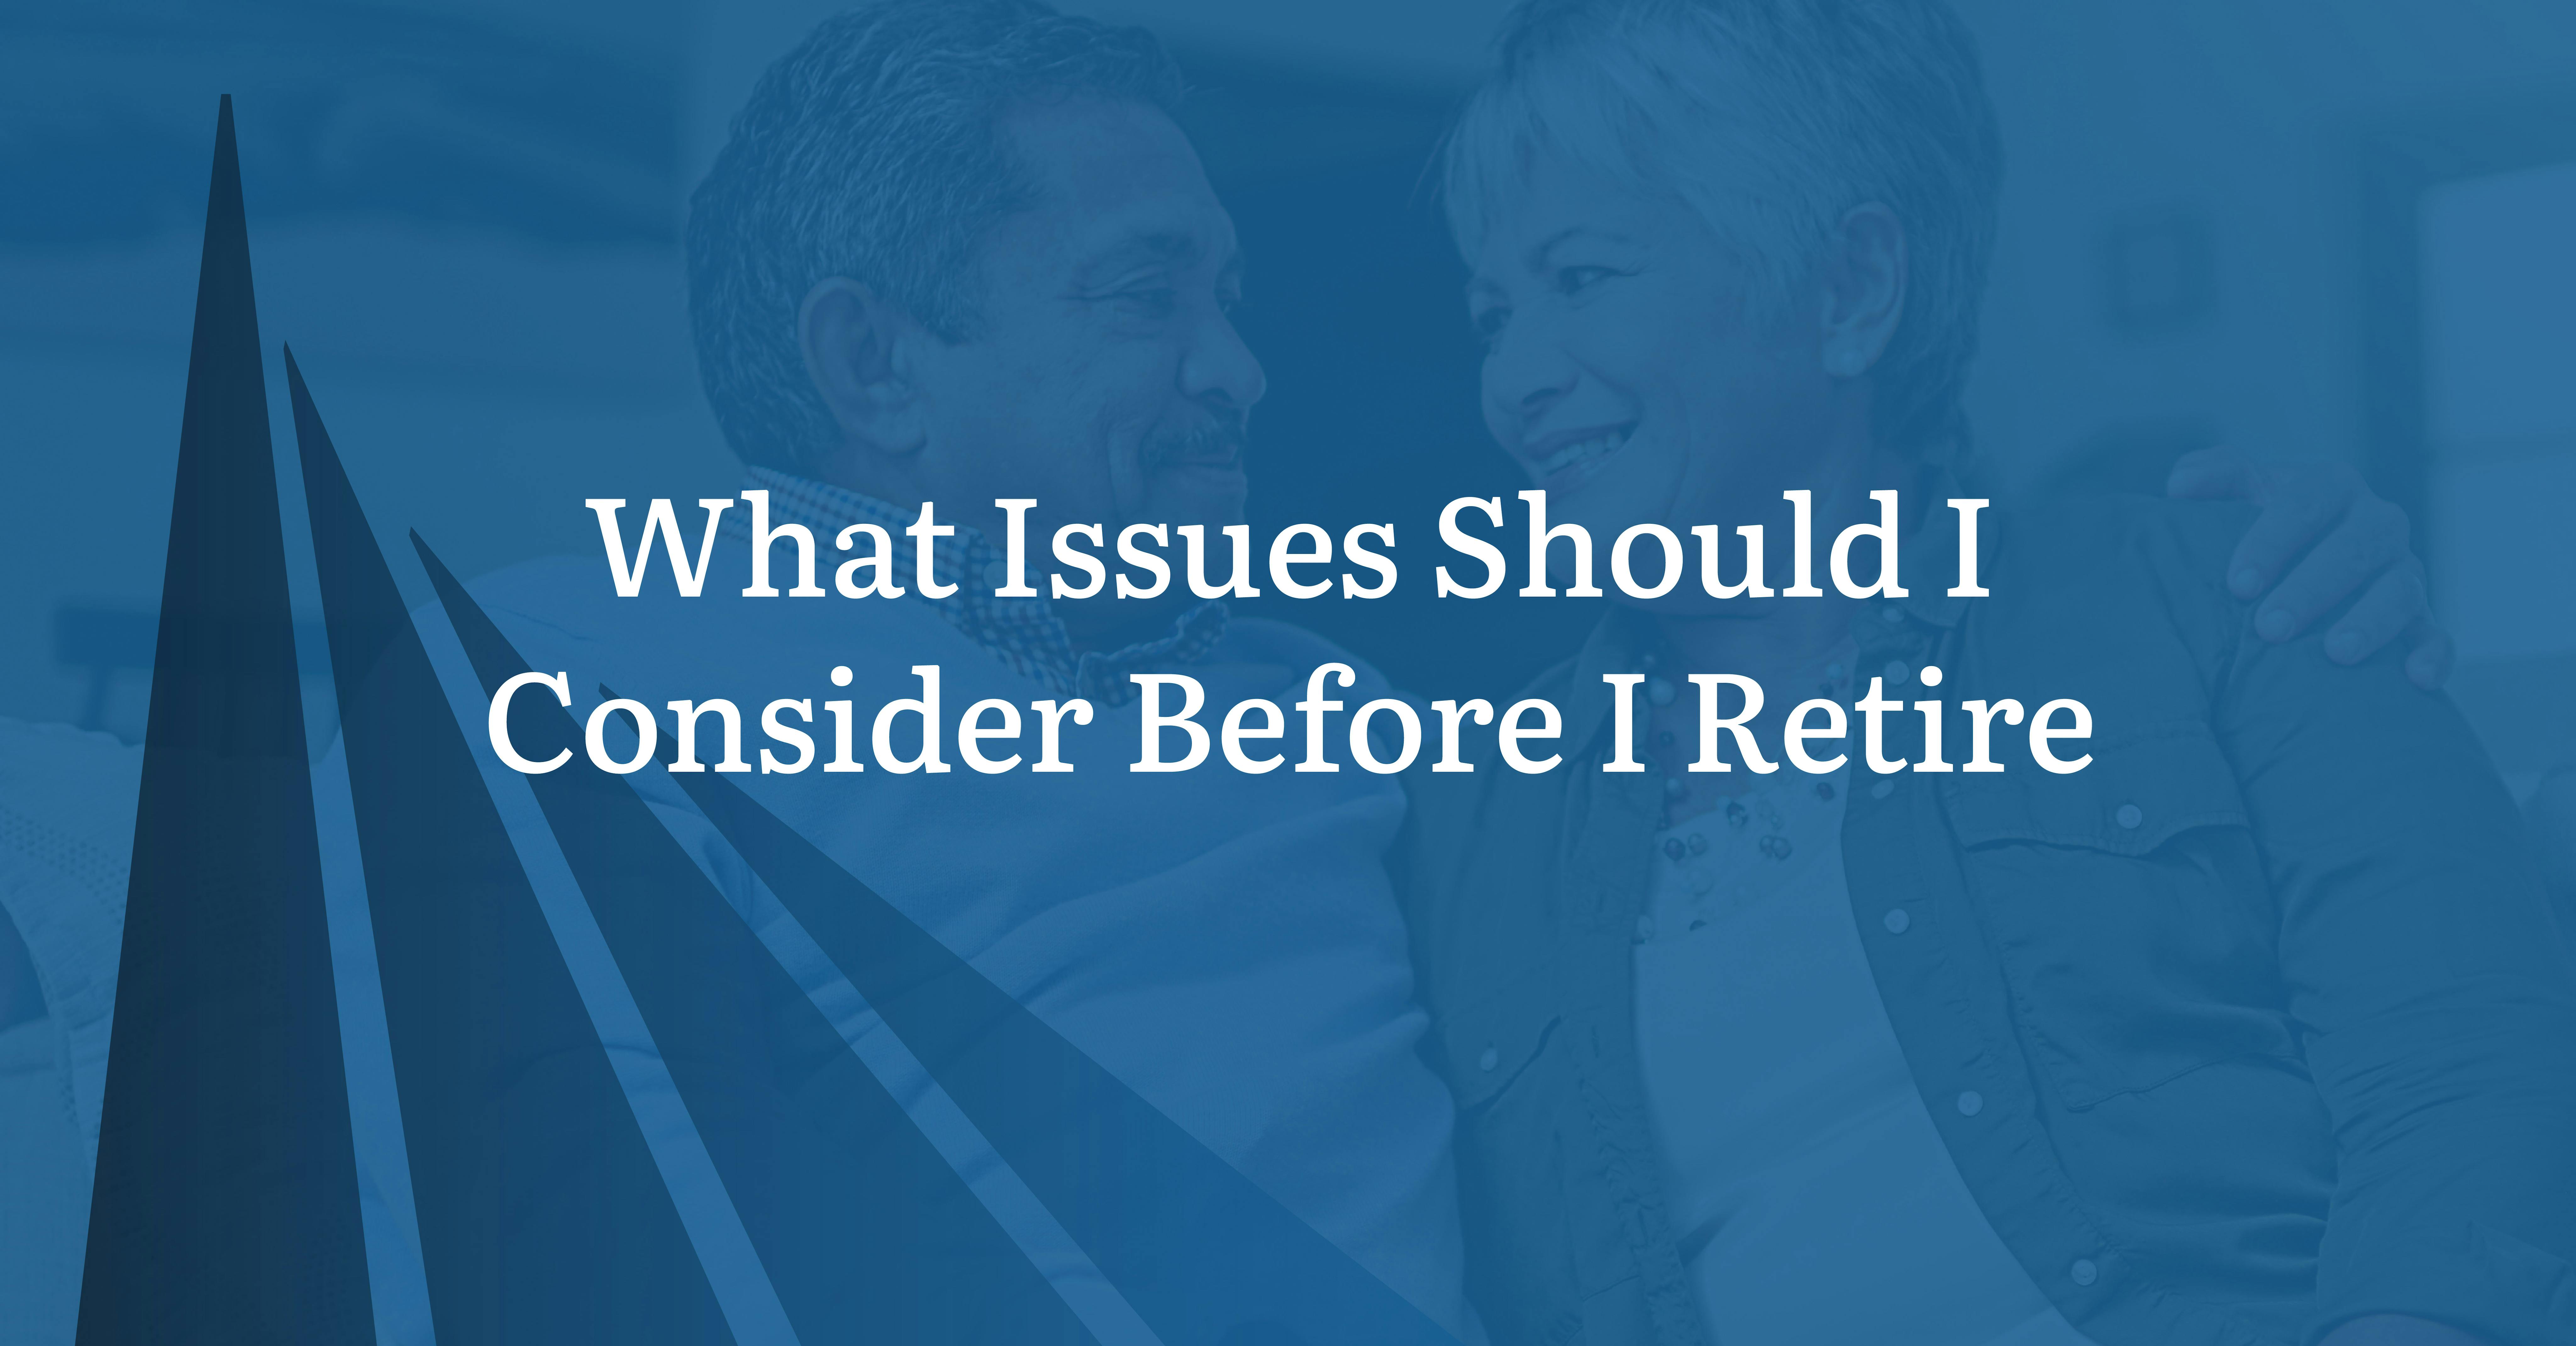 What Issues Should I Consider Before I Retire